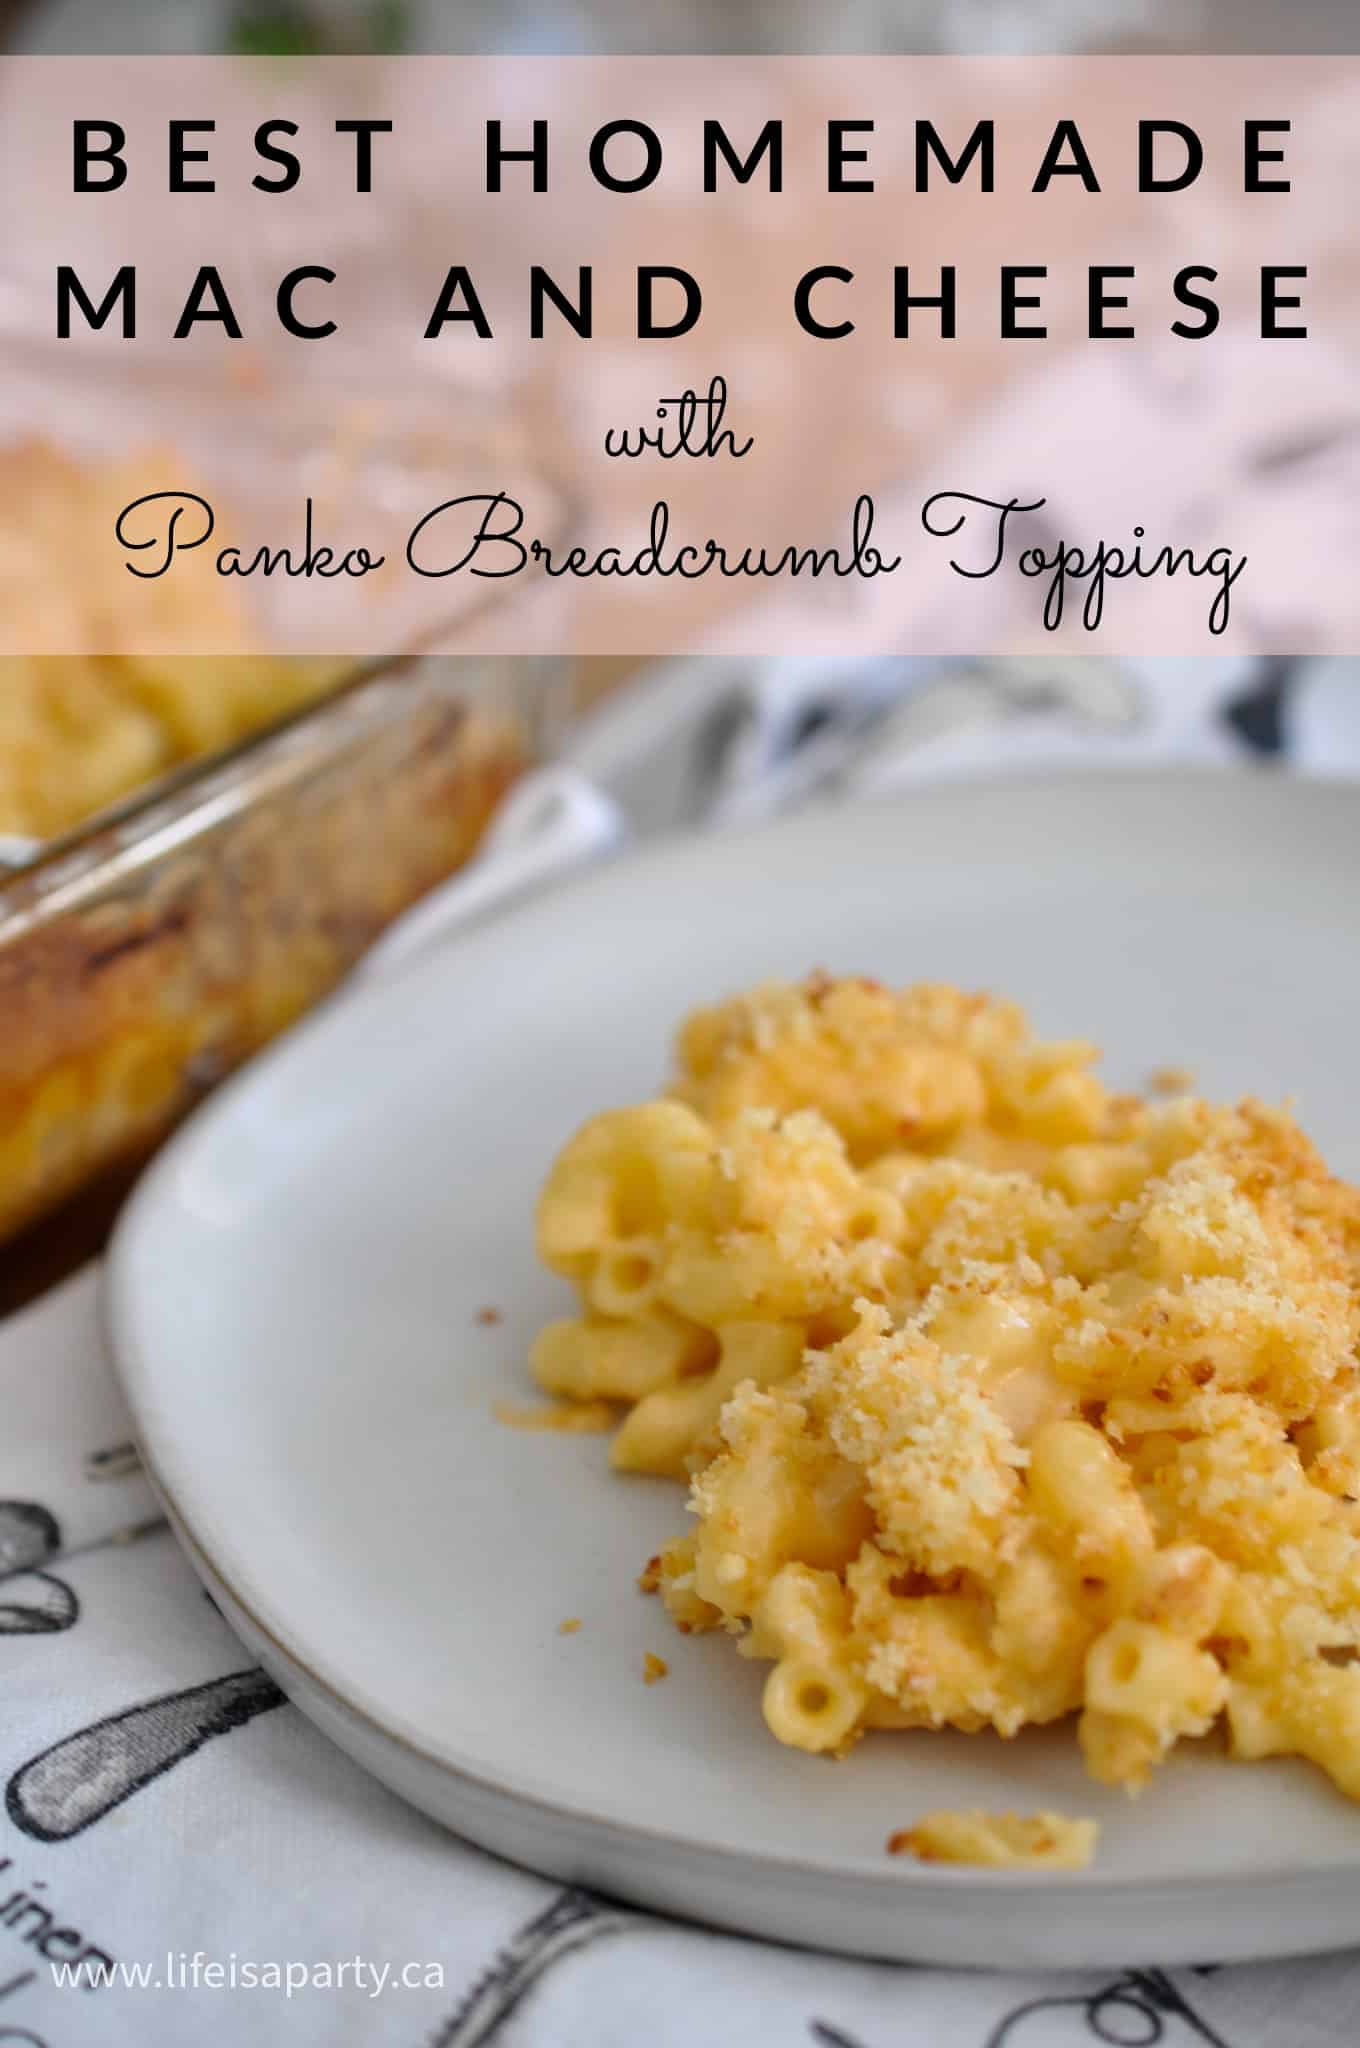 Best Homemade Mac and Cheese with Panko Breadcrumb Topping